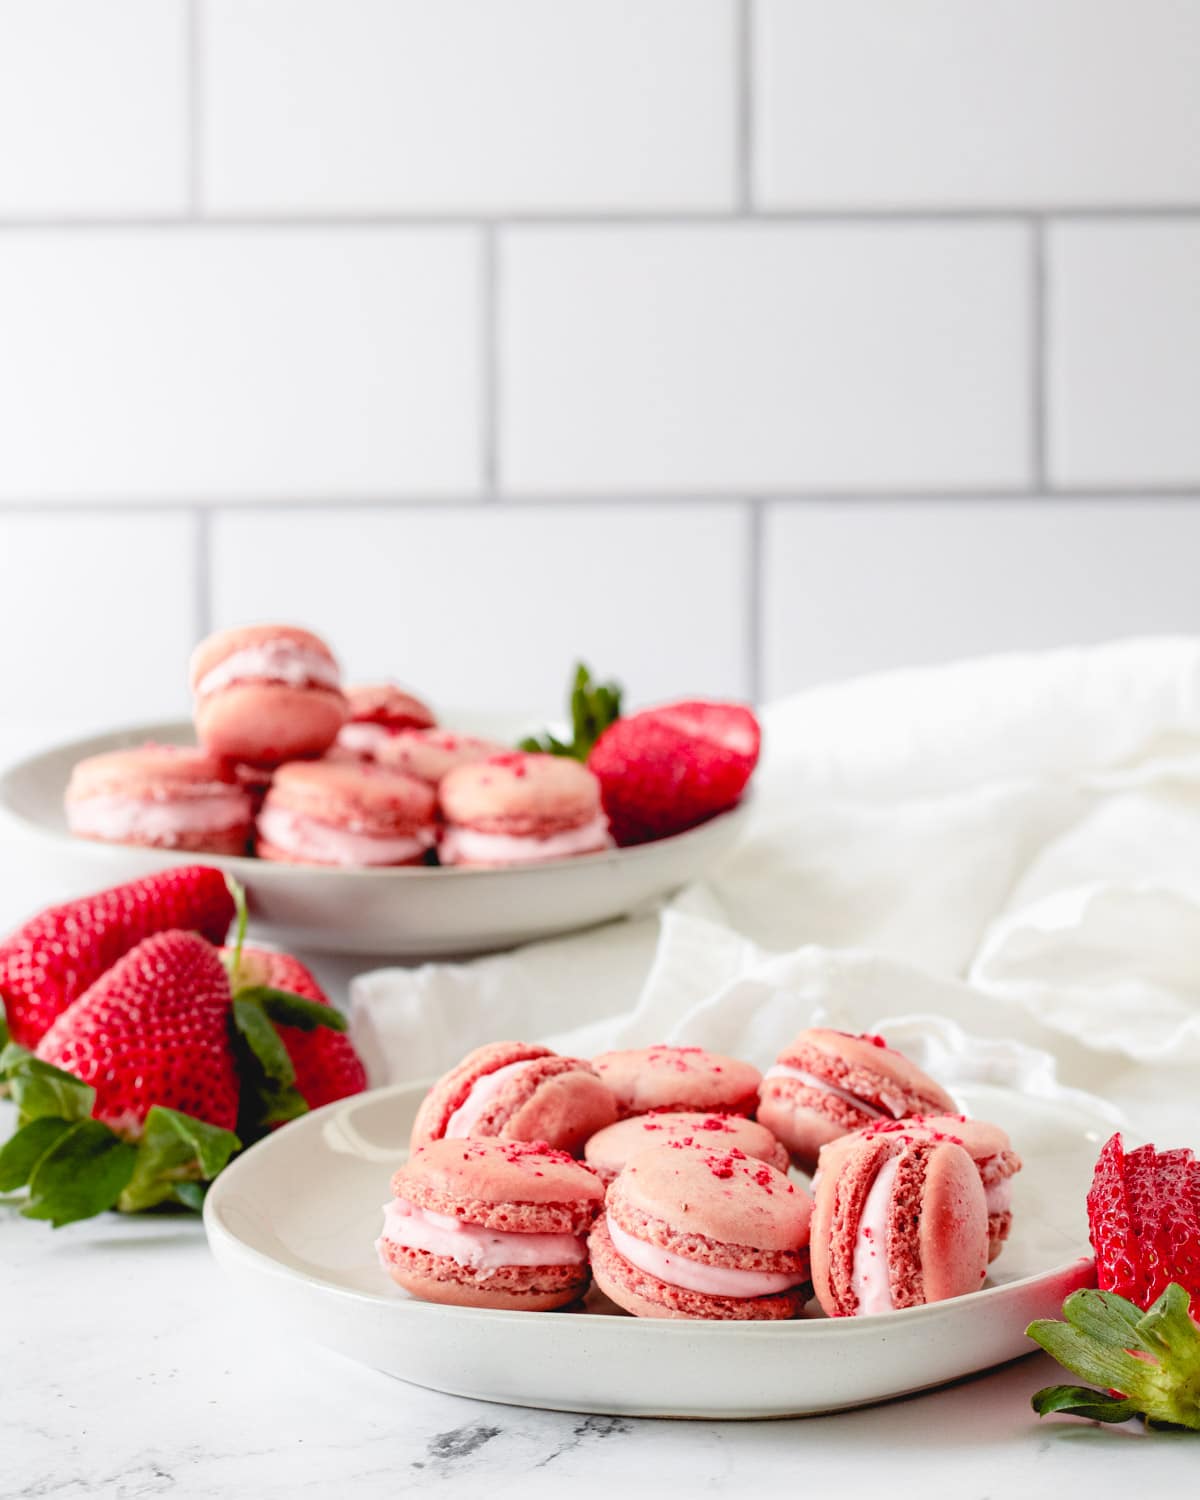 Two plates of strawberry macarons with some fresh strawberries scattered around.